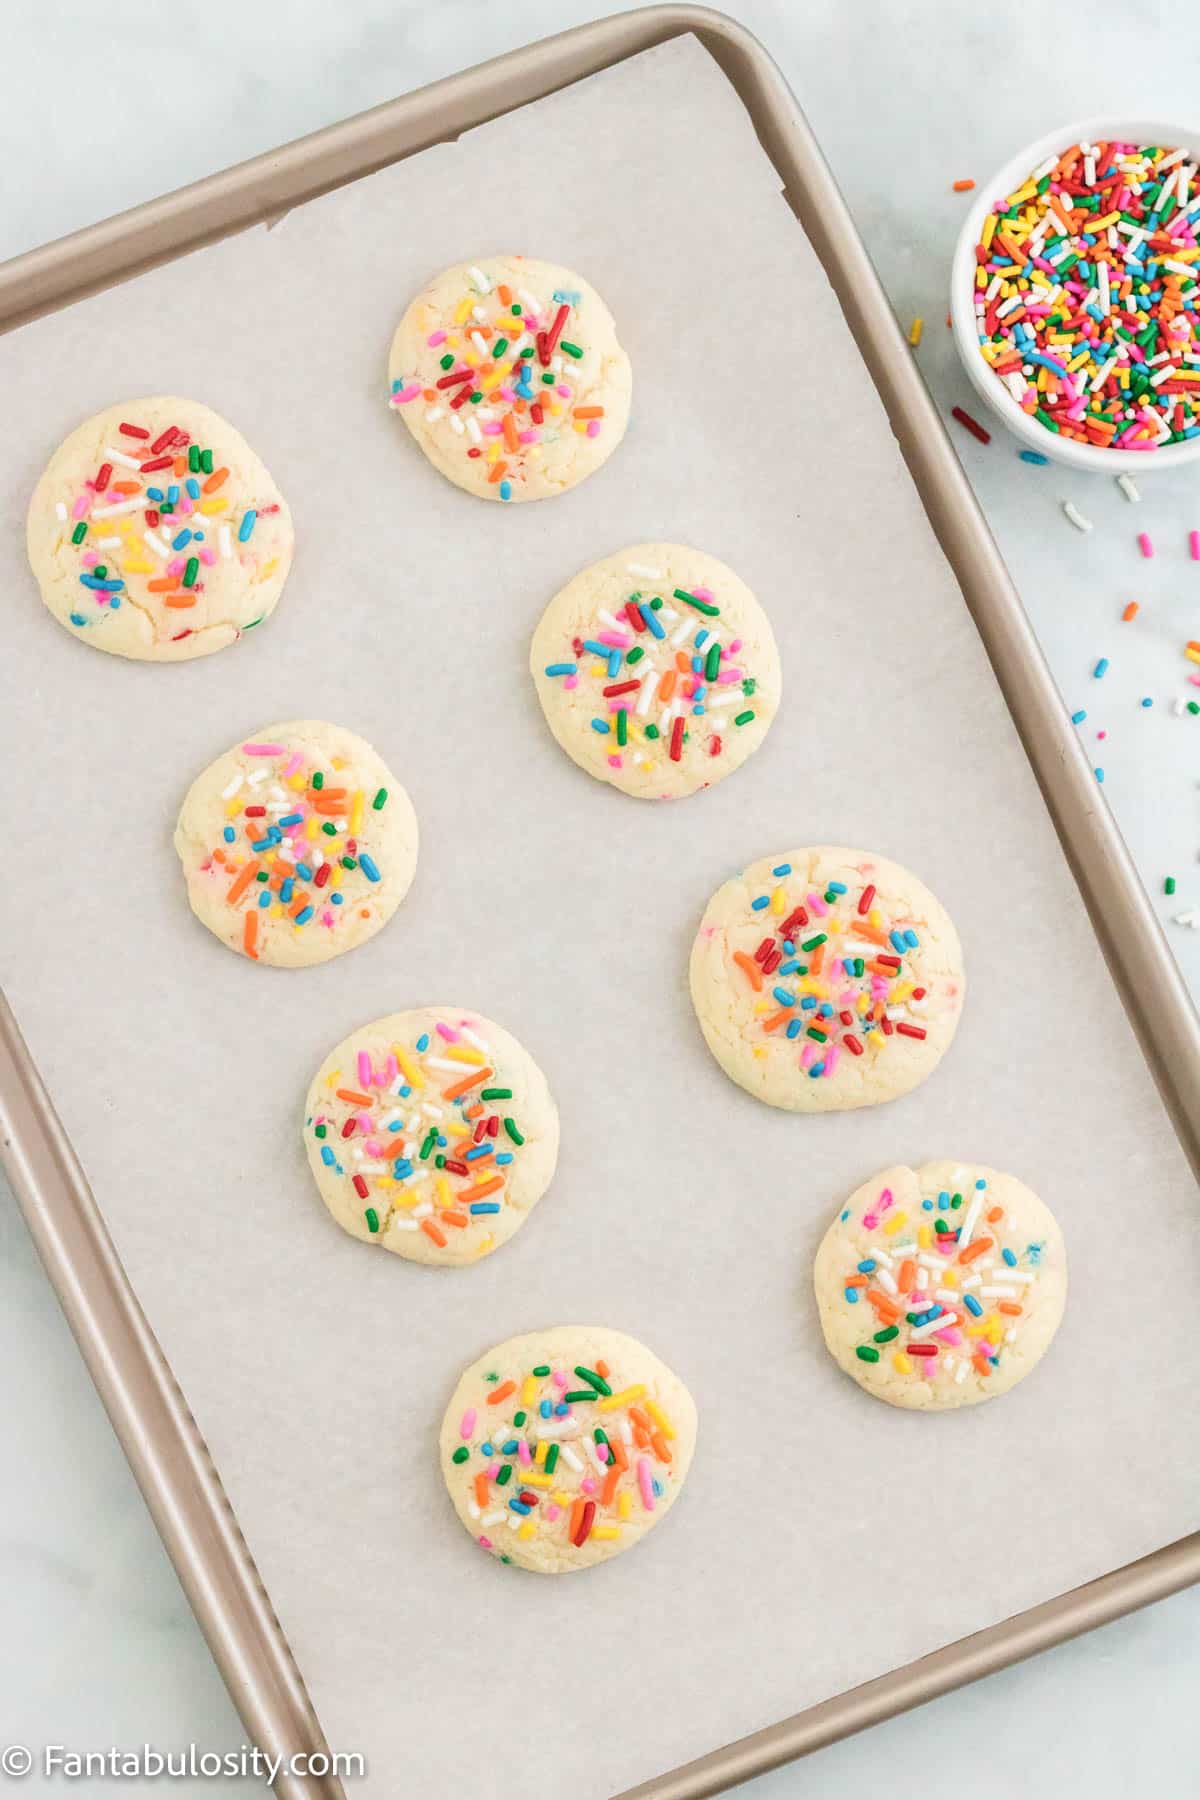 Baked funfetti cake mix cookies on a parchment lined baking sheet.